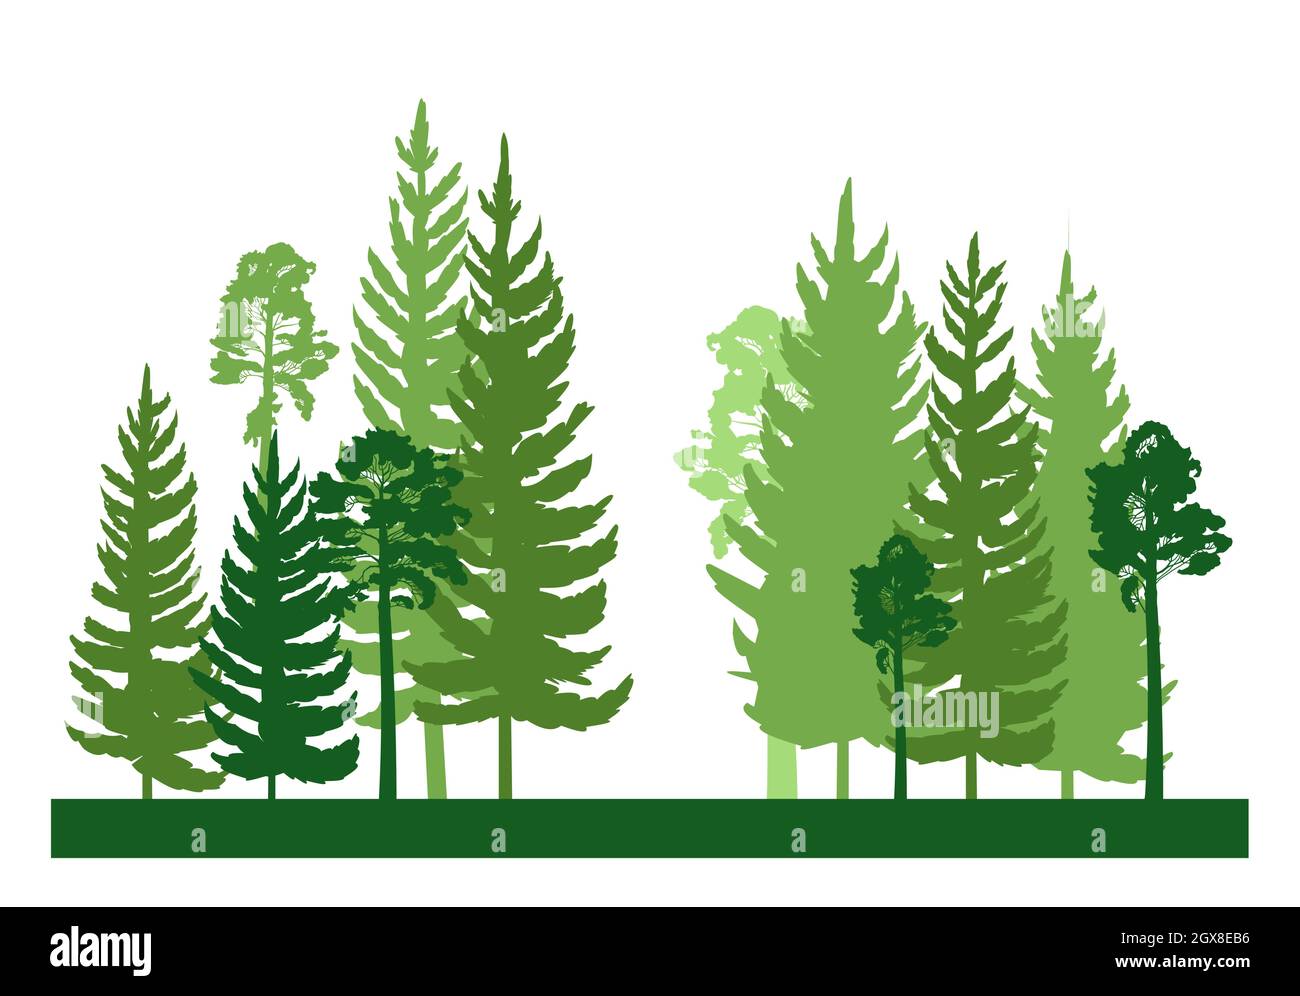 Forest silhouette scene. Landscape with coniferous trees. Beautiful green view. Pine and spruce trees. Summer nature. Isolated illustration vector Stock Vector